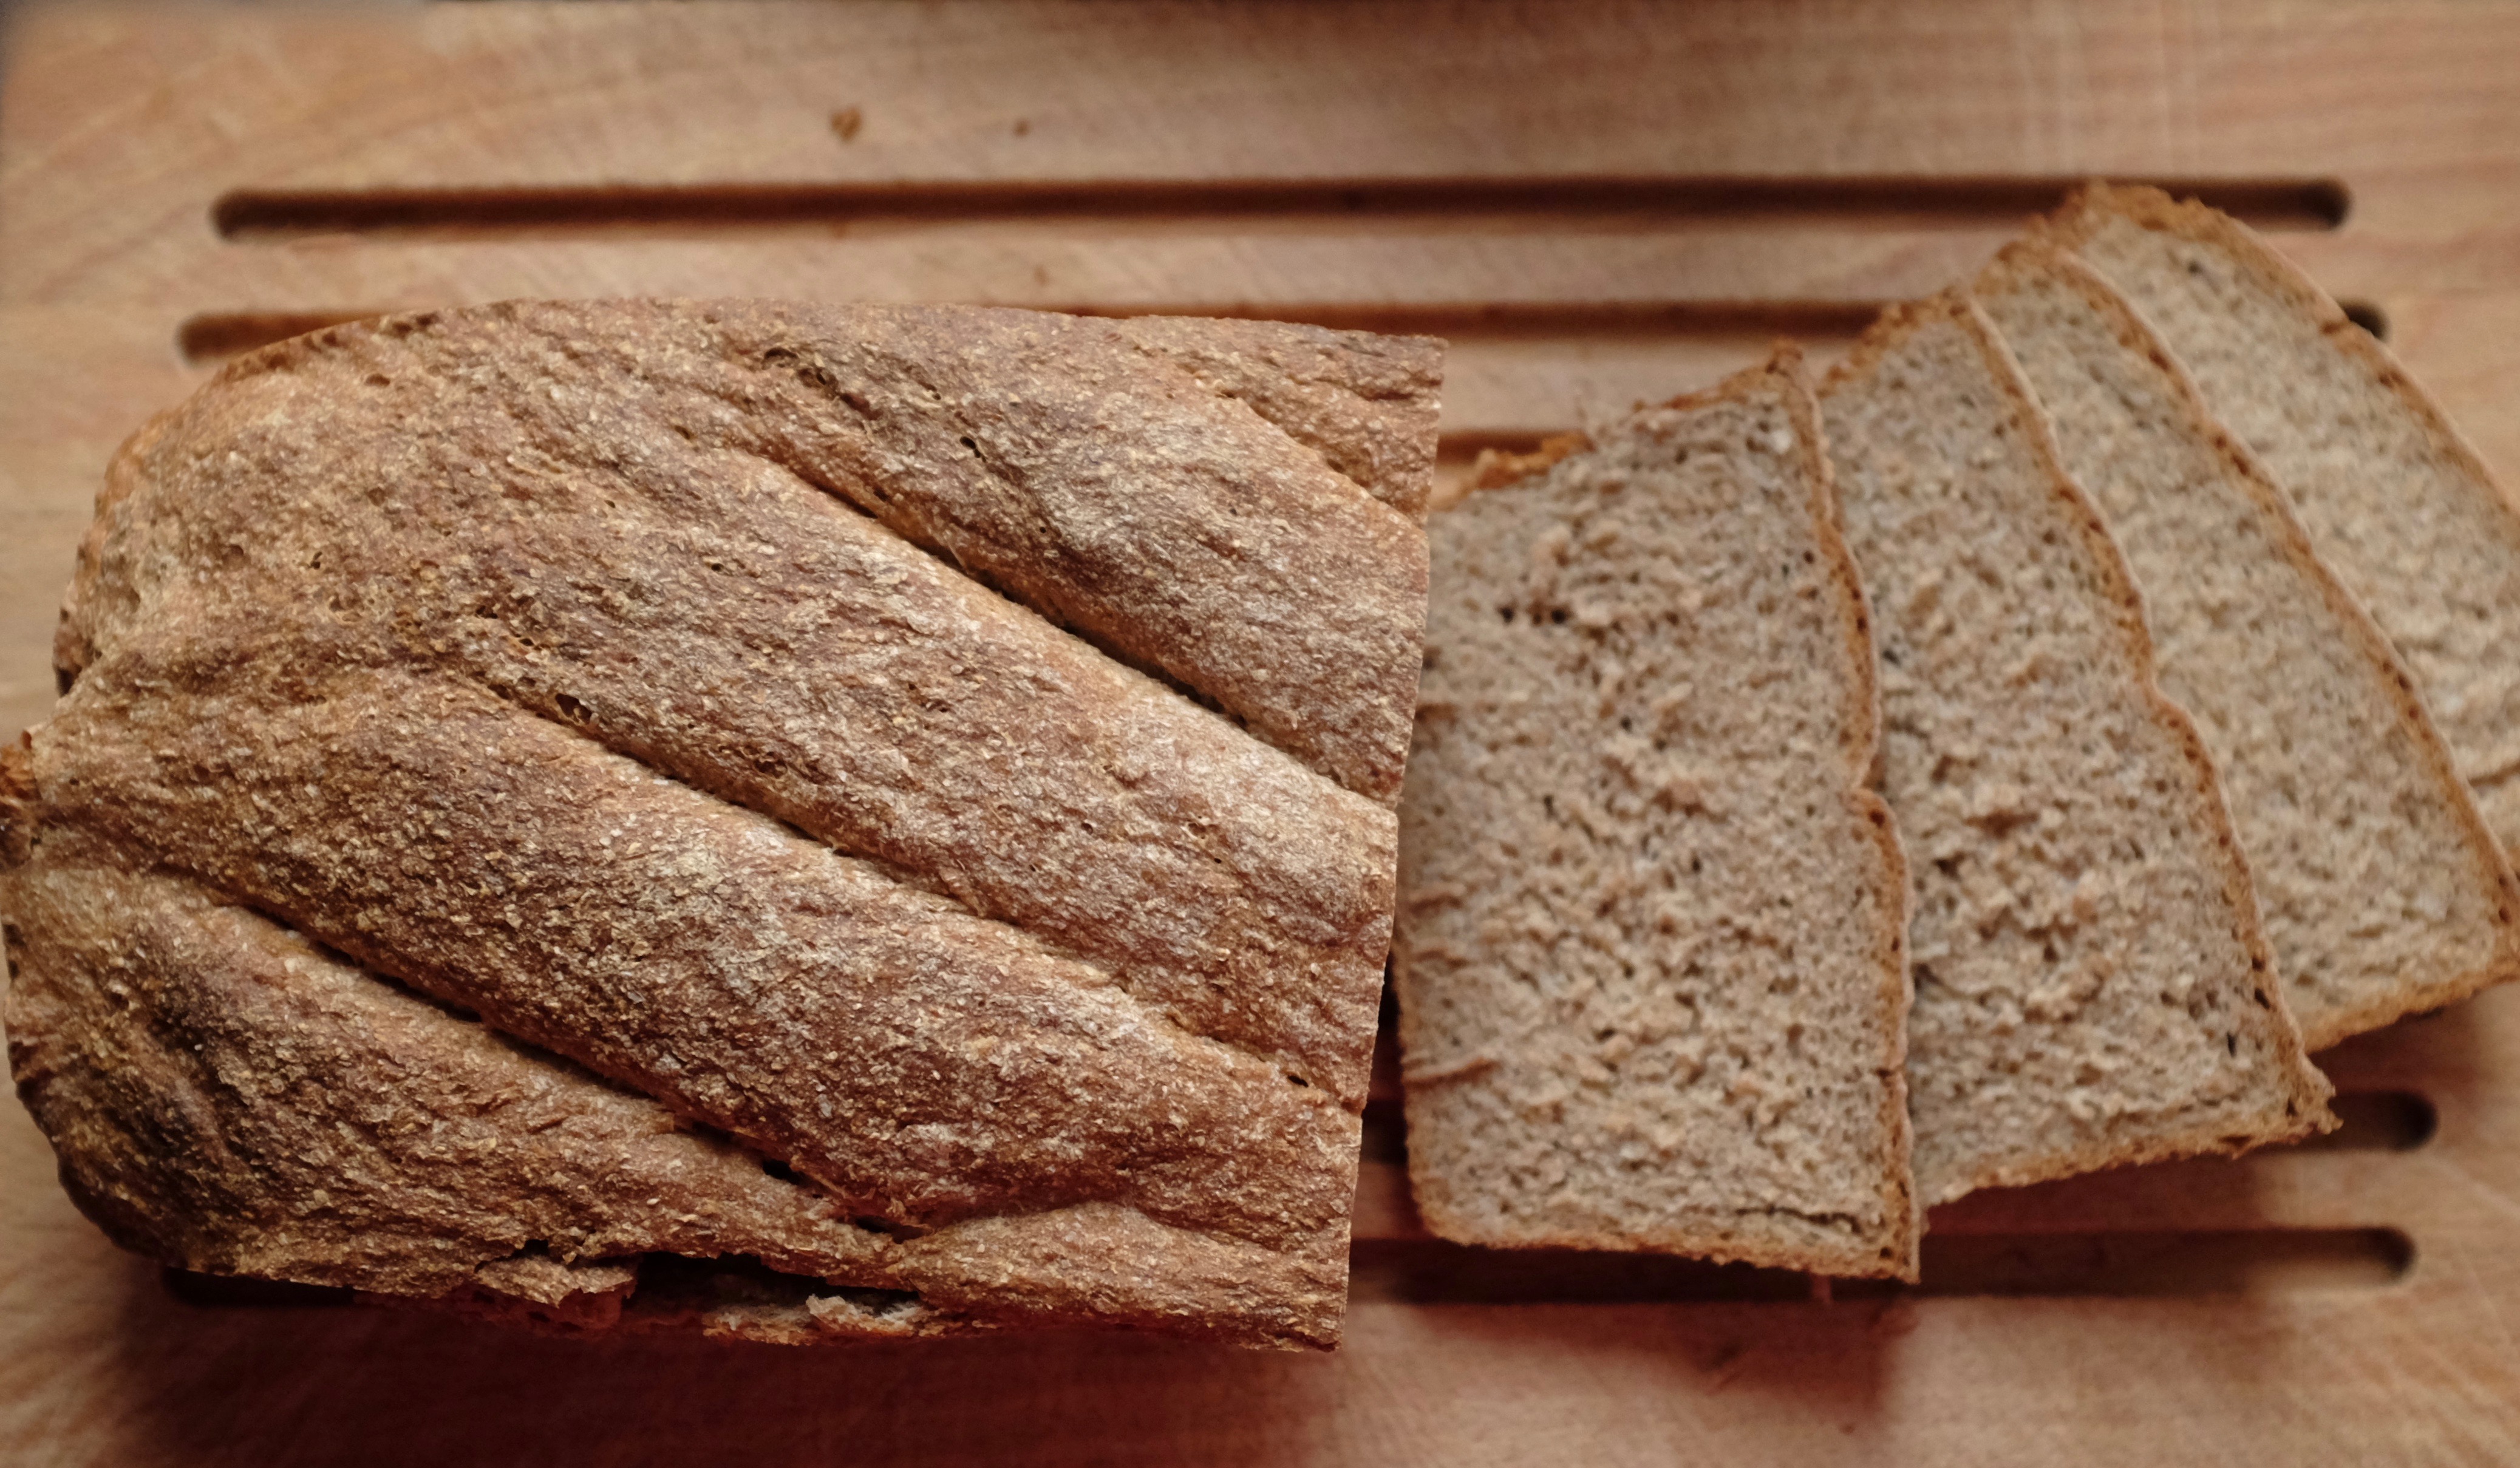 An image of a bread called “Simple Wholemeal & Rye”